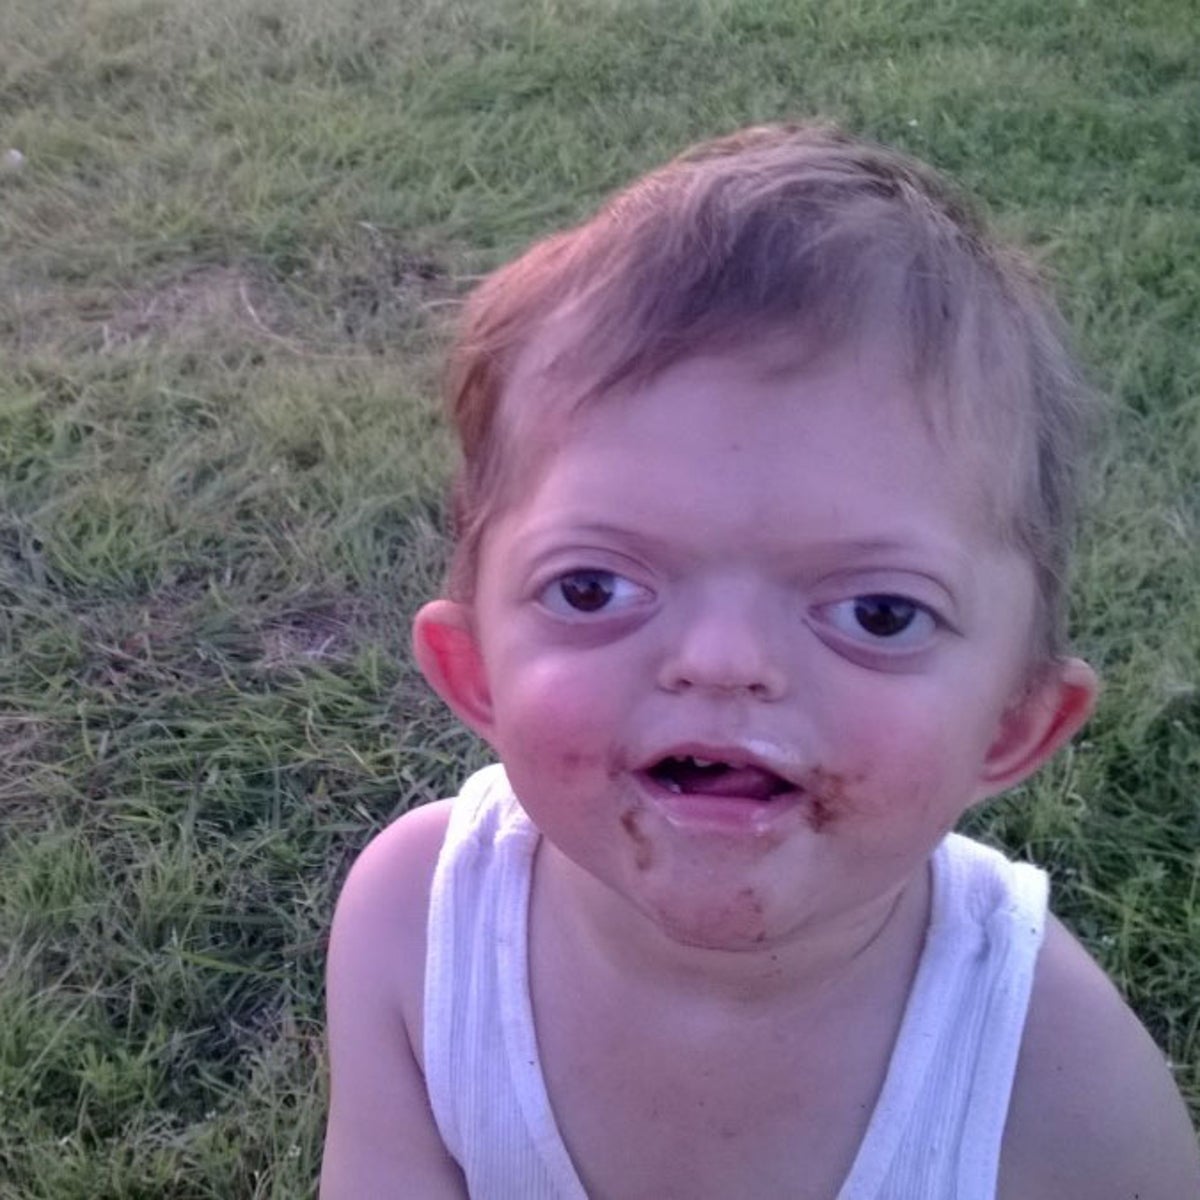 Mother fights back against internet trolls using picture of her disabled  son to create cruel meme, The Independent